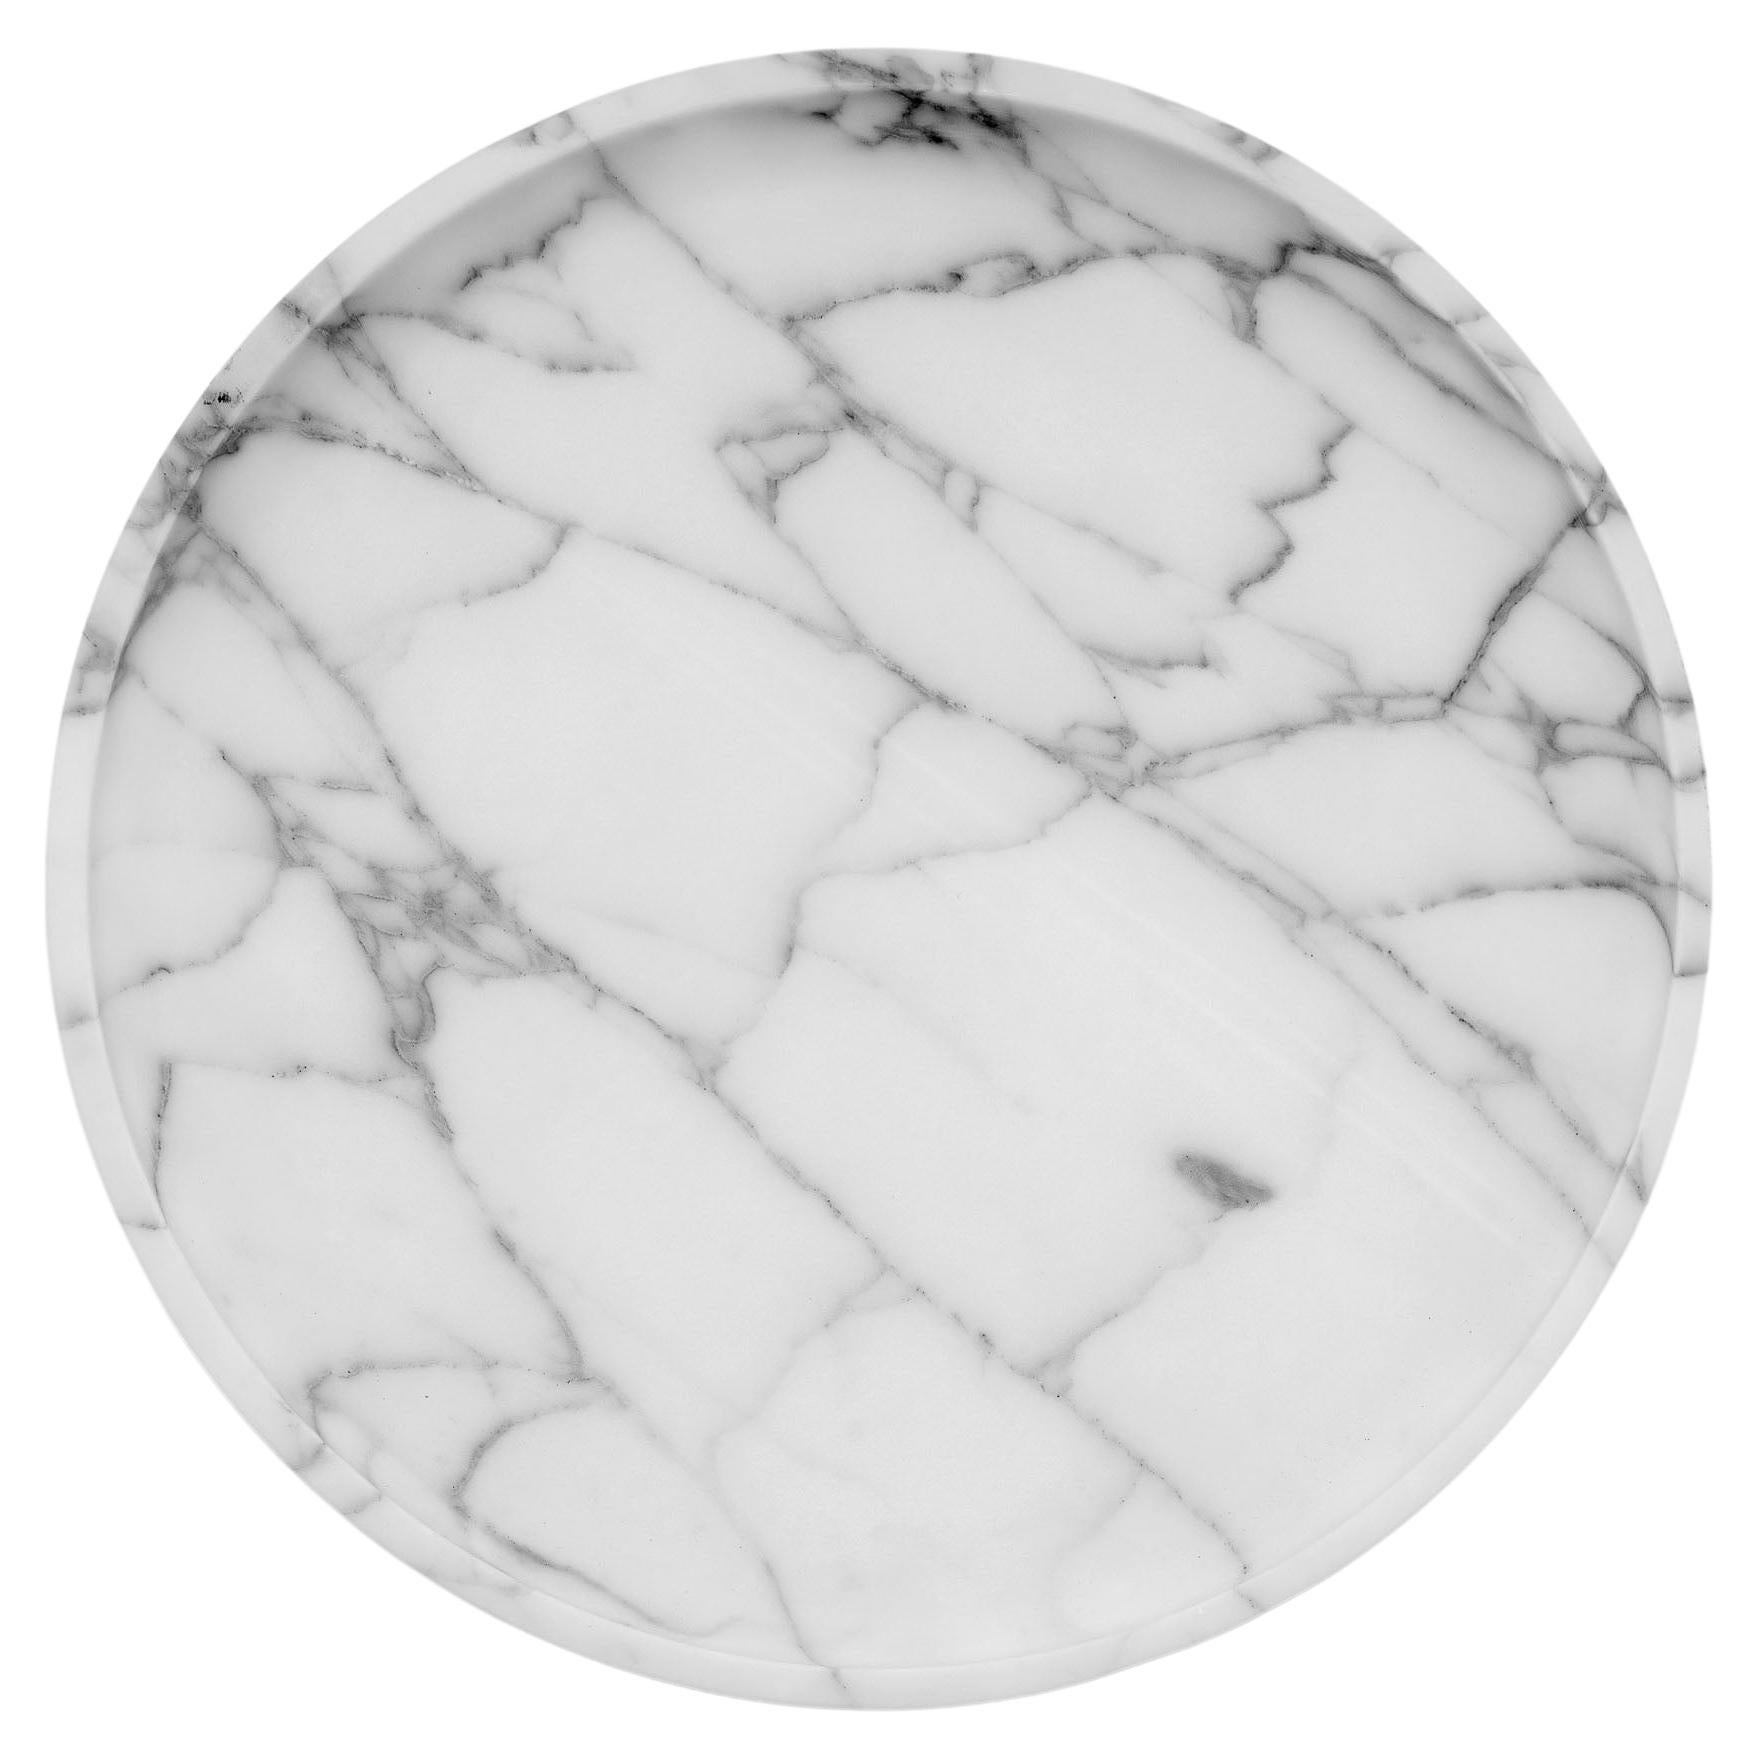 Mirage Contenitore Basso by Studio Intervallo
Dimensions: D 30 x H 3.2 cm
Materials: white Arabescato marble.
Available in other stones.

The Mirage collection comes from the monolithic materiality of stone. Shape and function coincide,